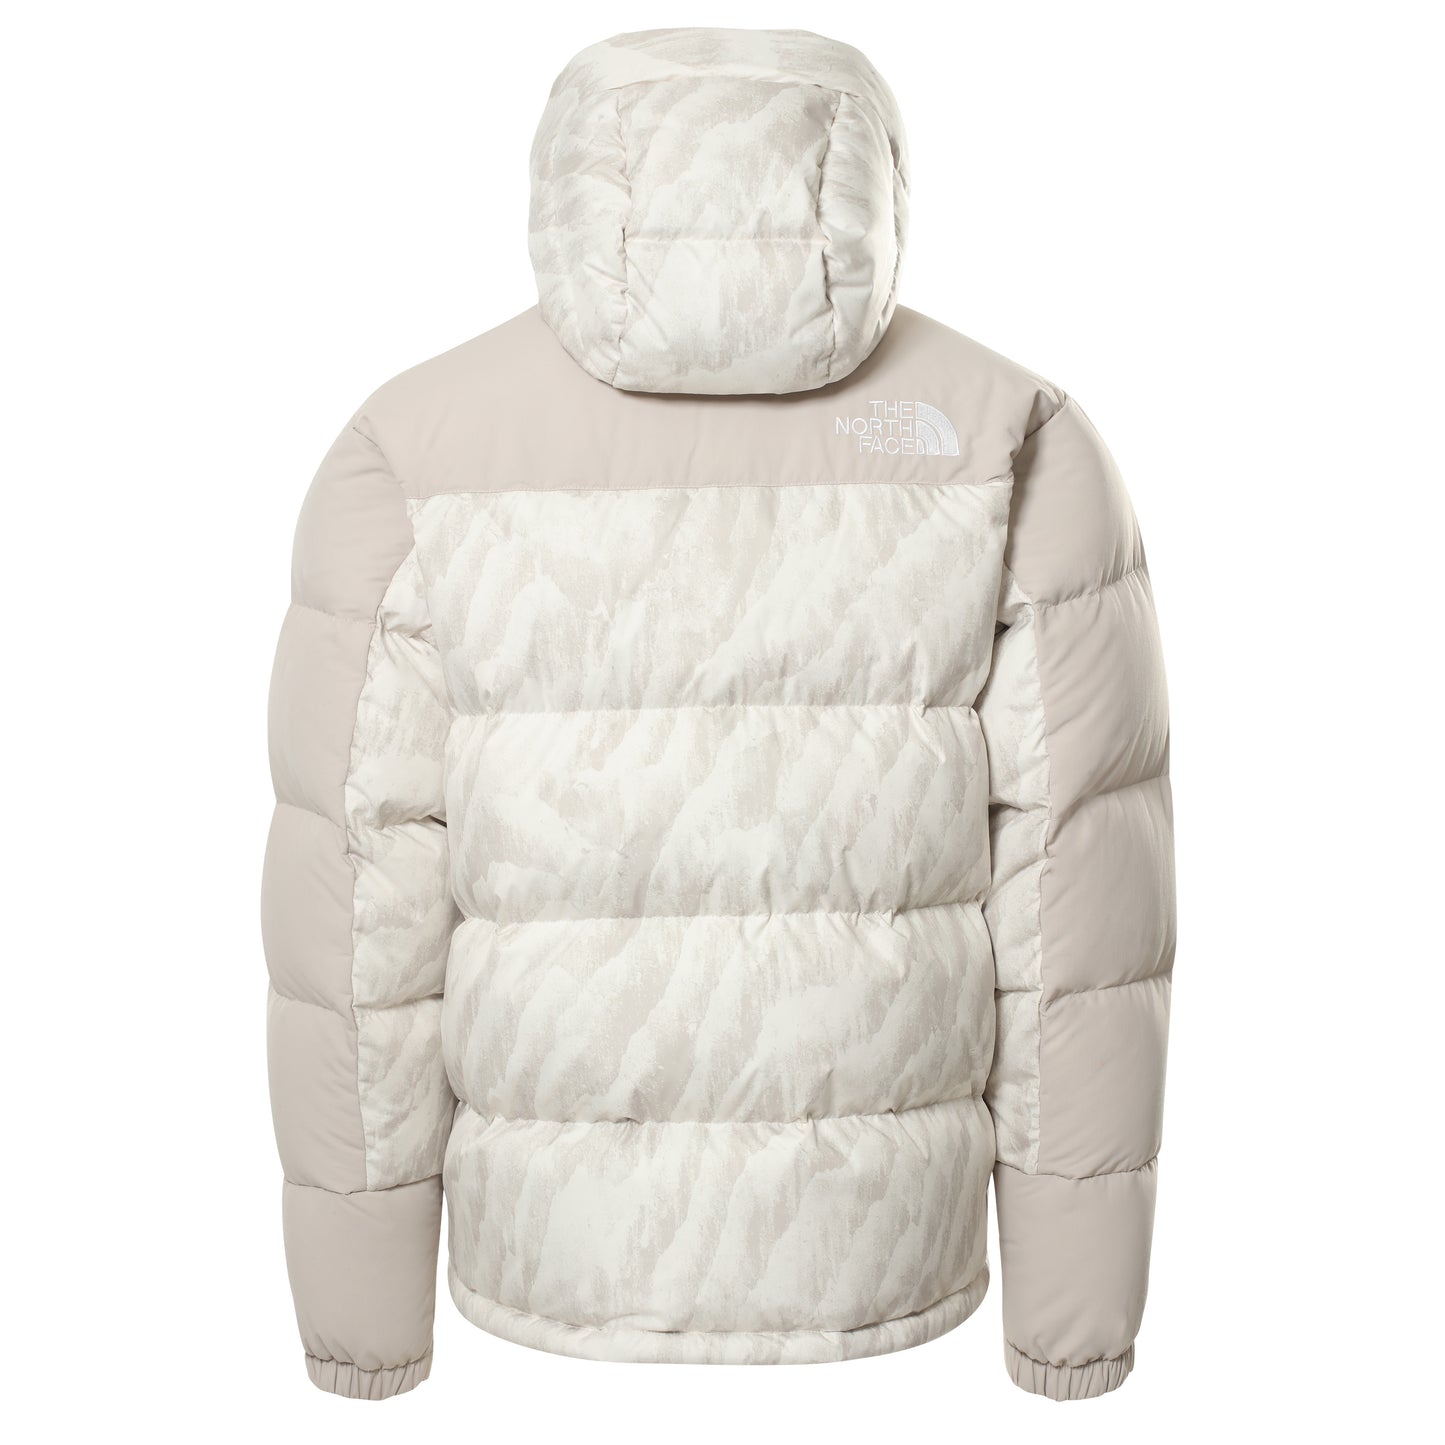 THE NORTH FACE - PRINTED DOWN JACKET - silver gray wooden tiger print 